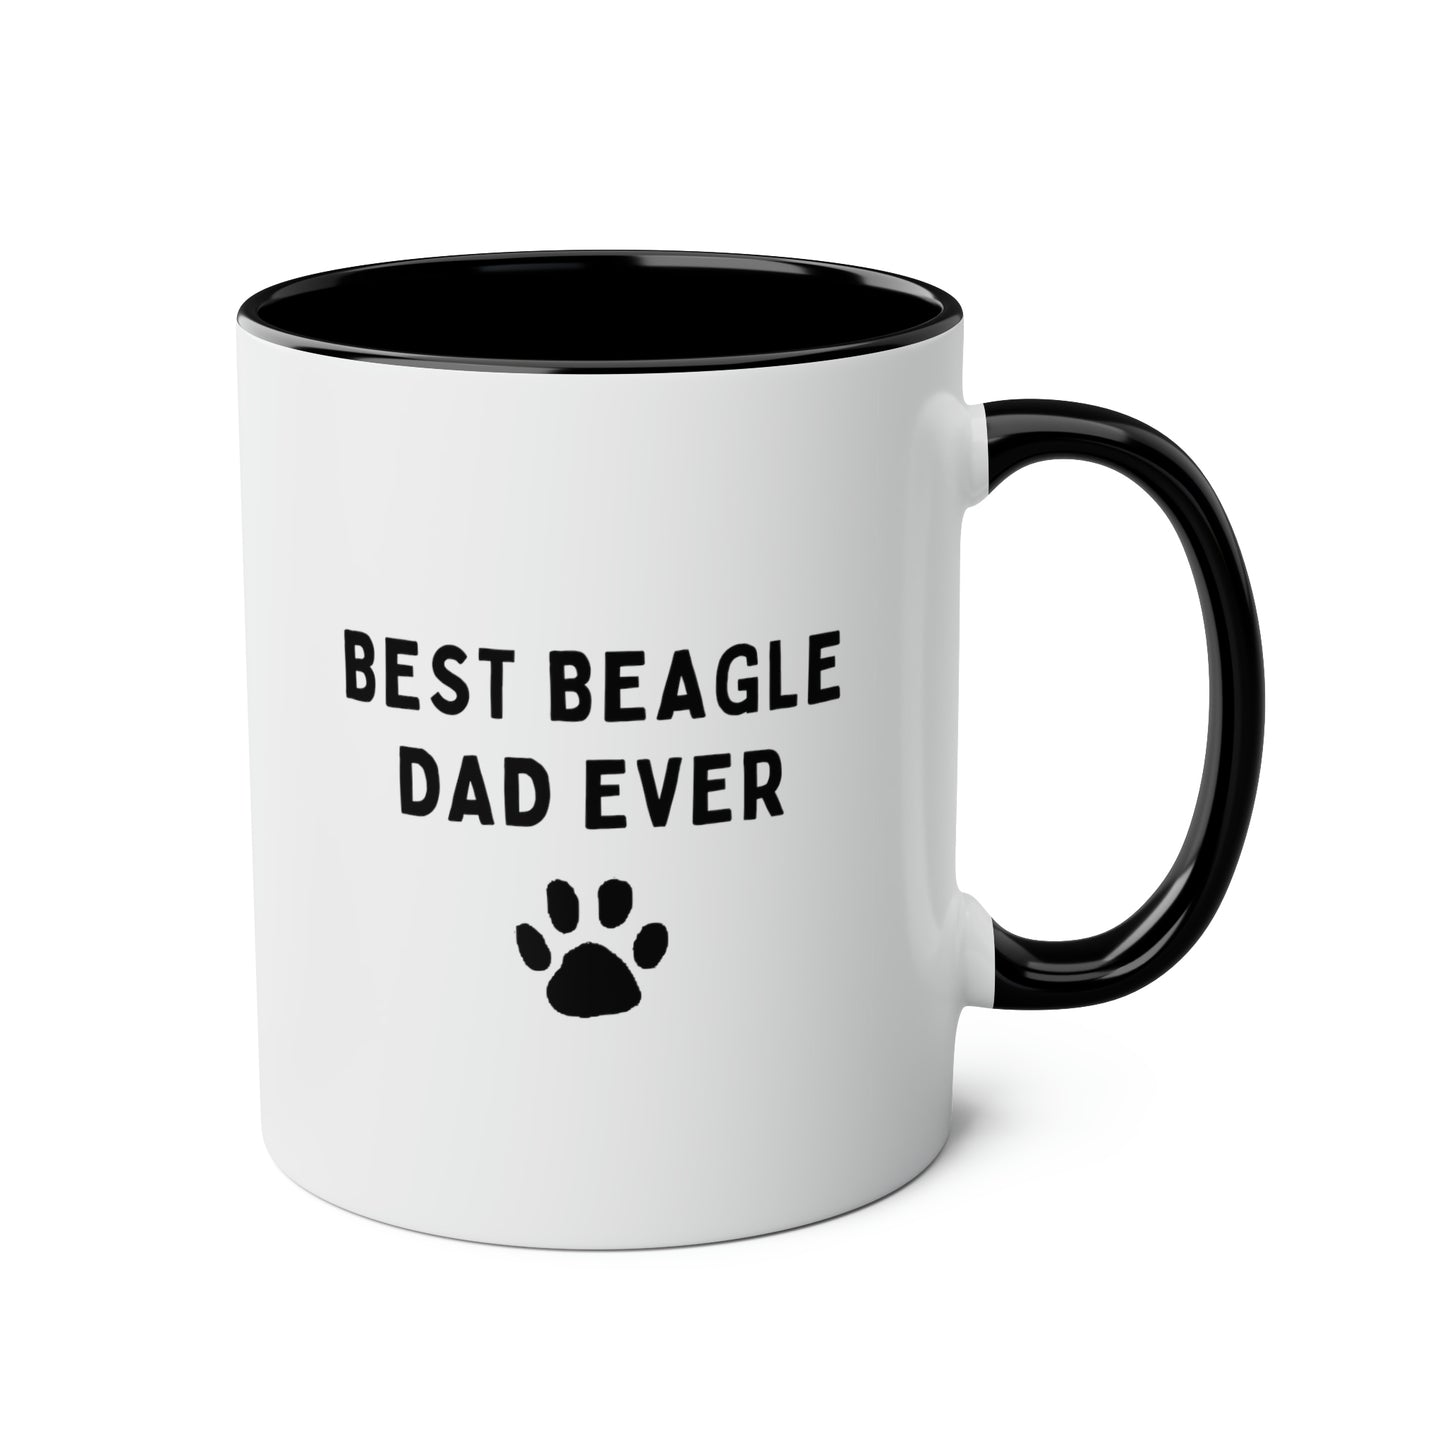 Best Beagle Dad Ever 11oz white with black accent funny large coffee mug gift for father's day him granddad dog lover pet owner furparent waveywares wavey wares wavywares wavy wares